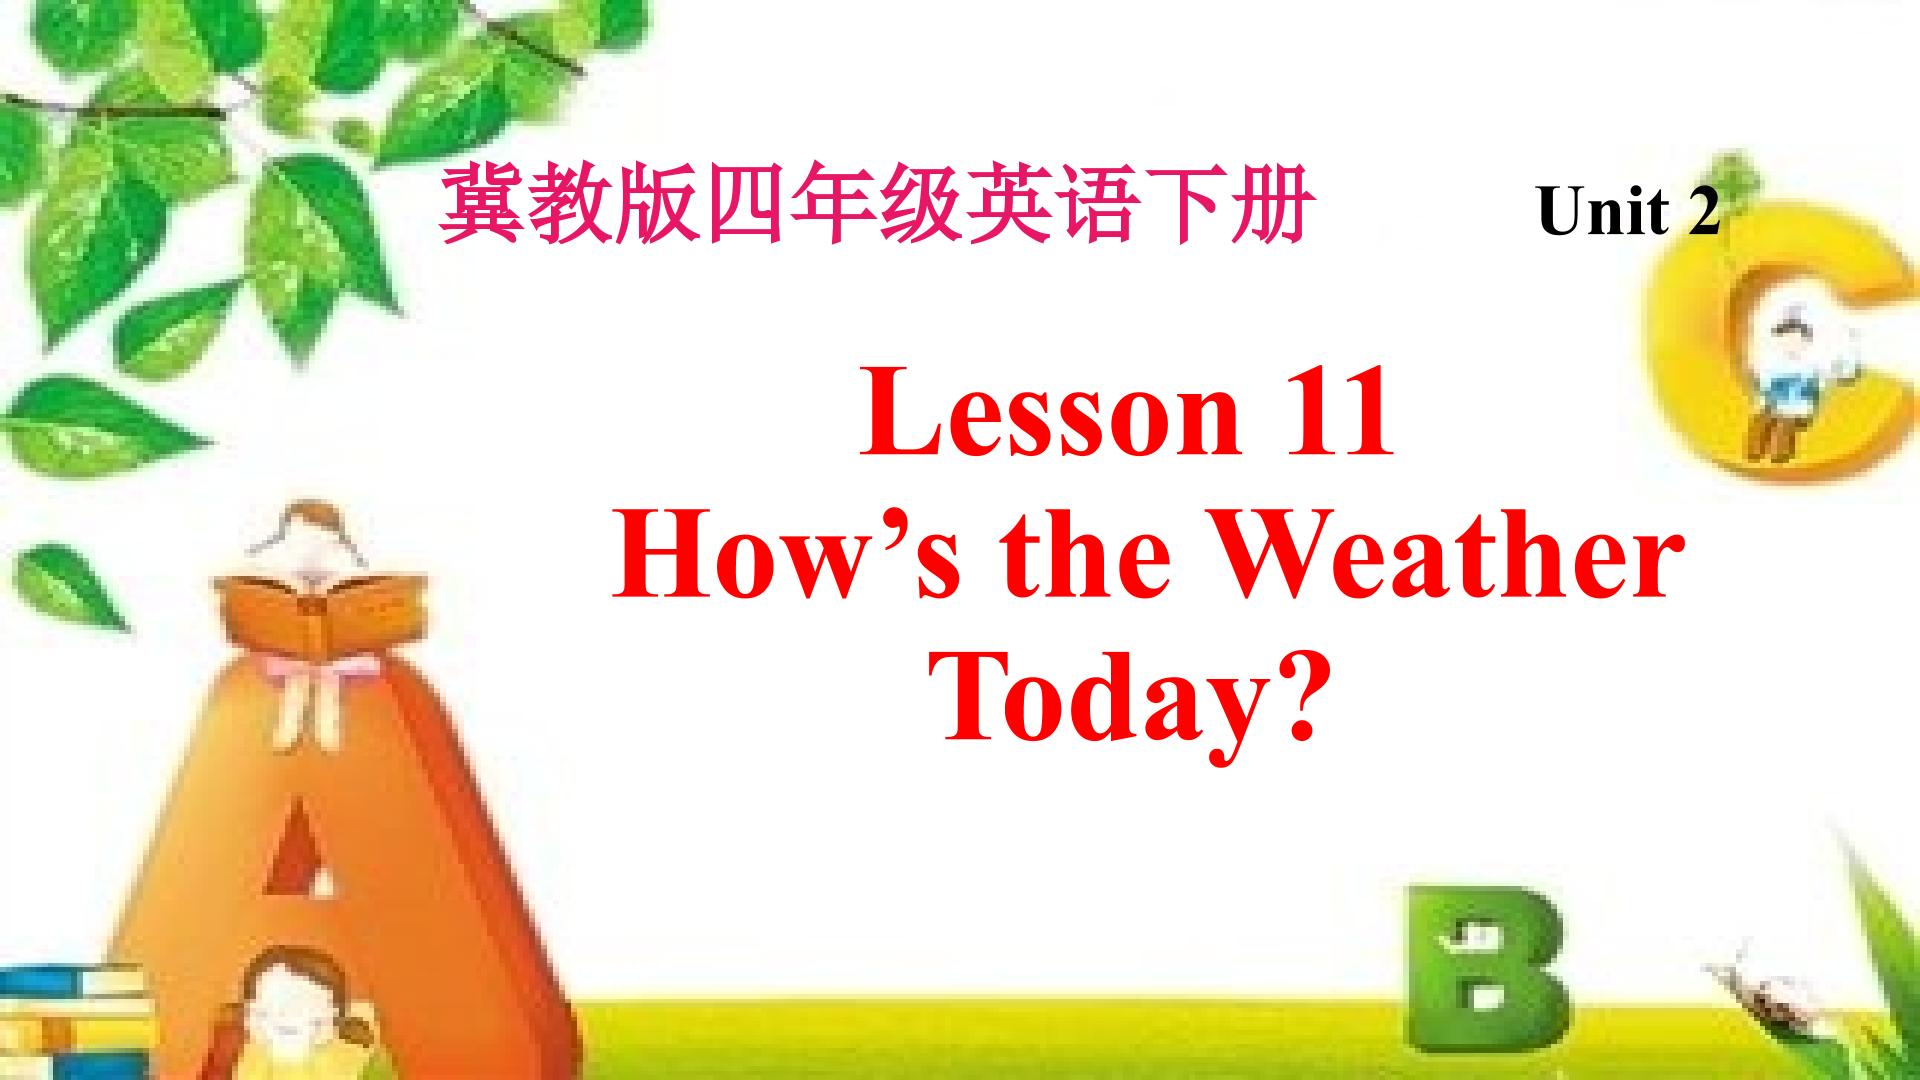 Lesson 11 How's the weather today?